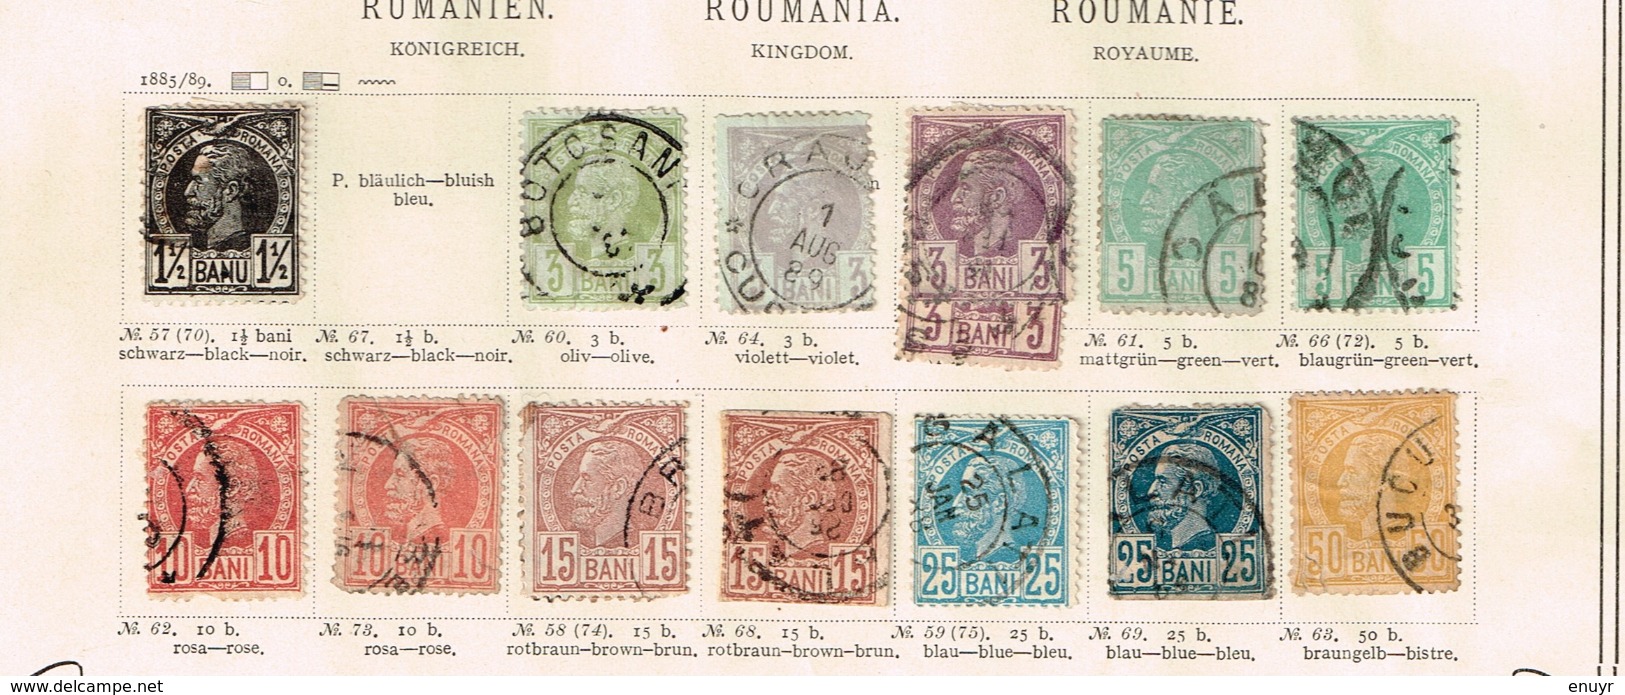 Roumanie. Ancienne collection. Old collection. Altsammlung. Oude verzameling.